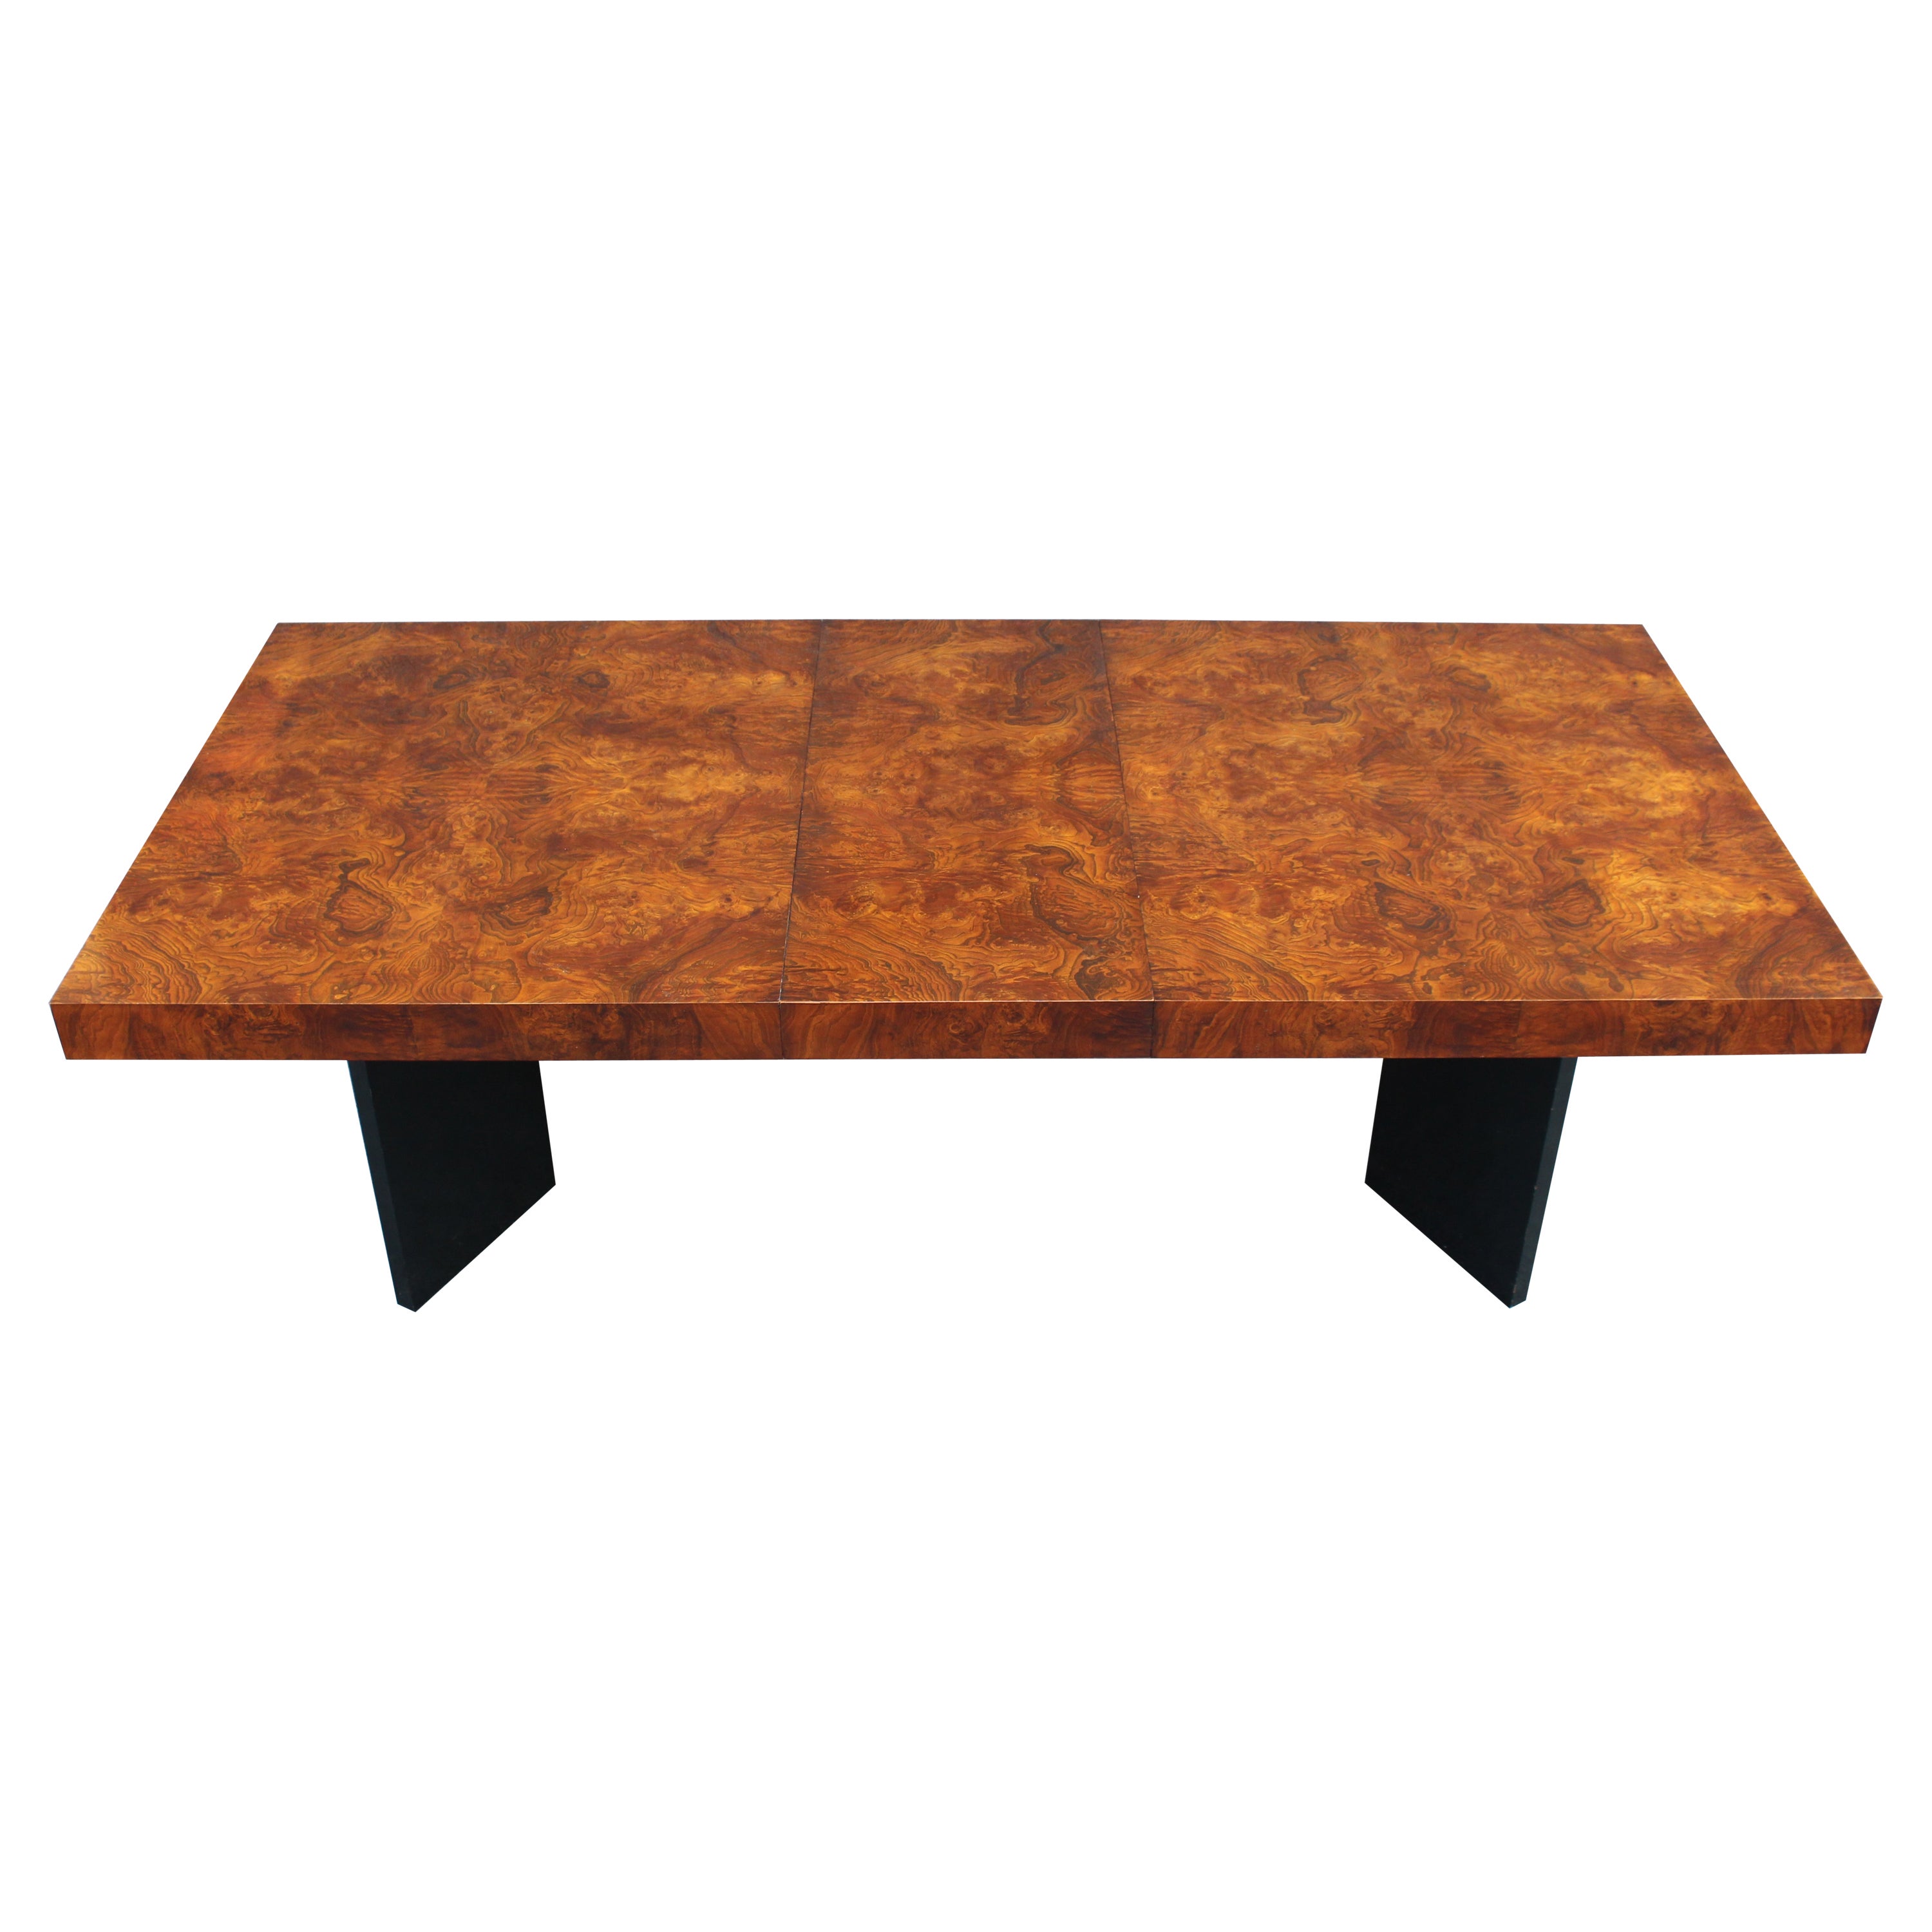 Milo Baughman Attr. Walnut Burl Large Dining Table with Extension Leaf